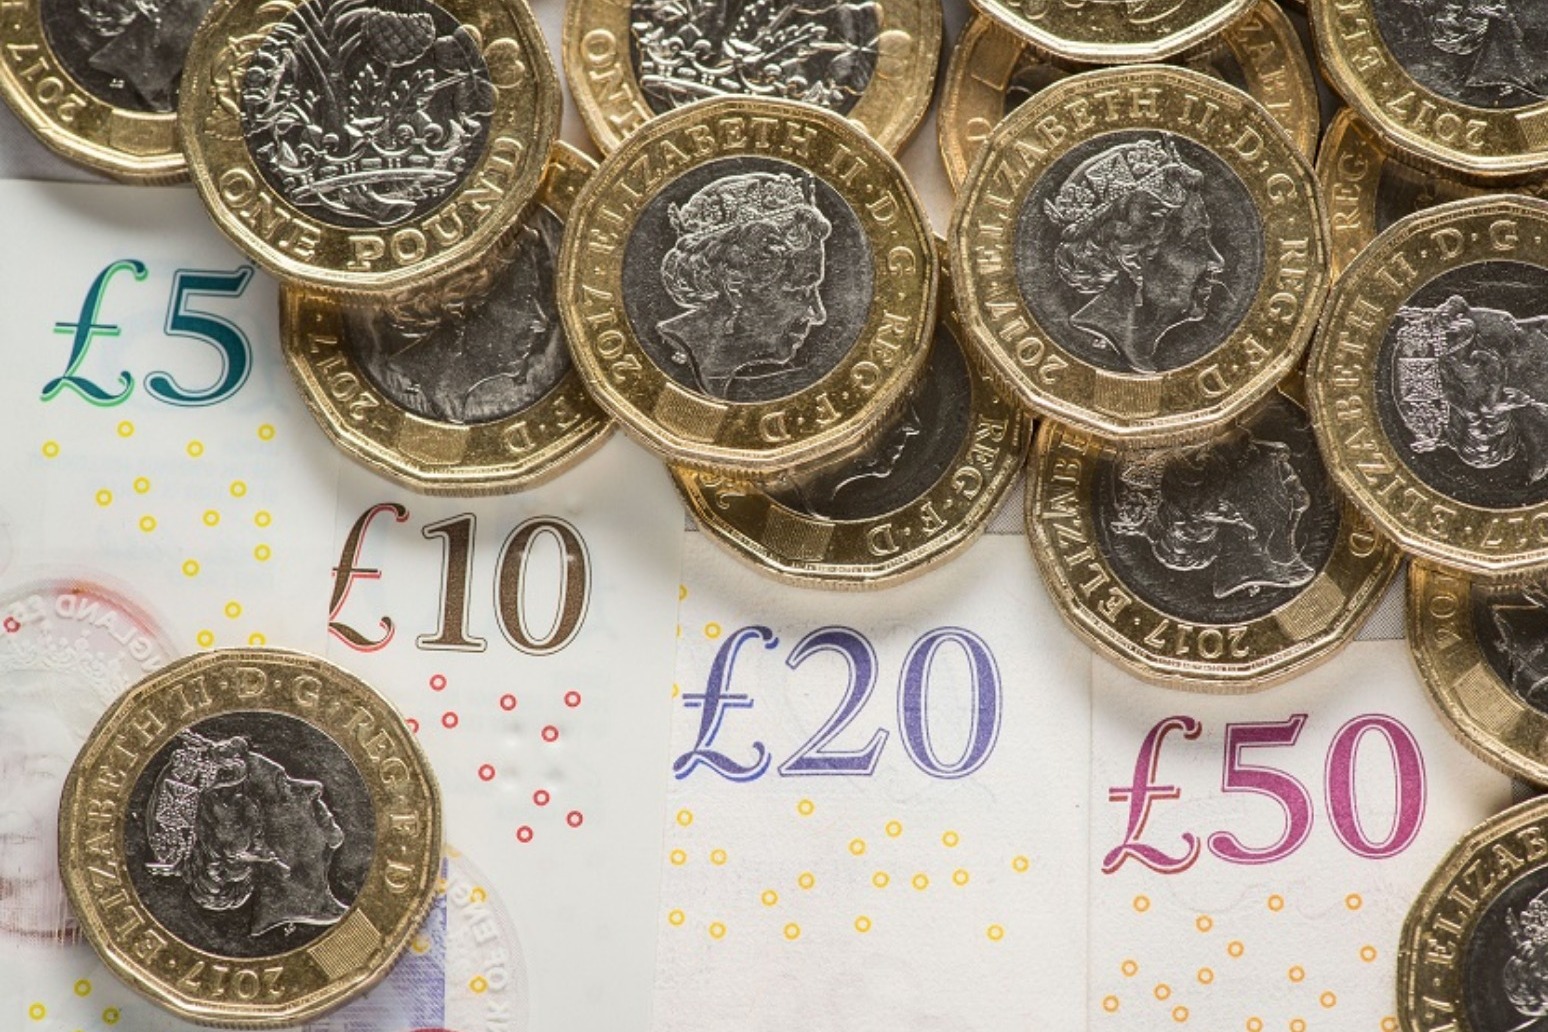 Cash deposits and withdrawals at Post Offices top £3bn in a month for first time 